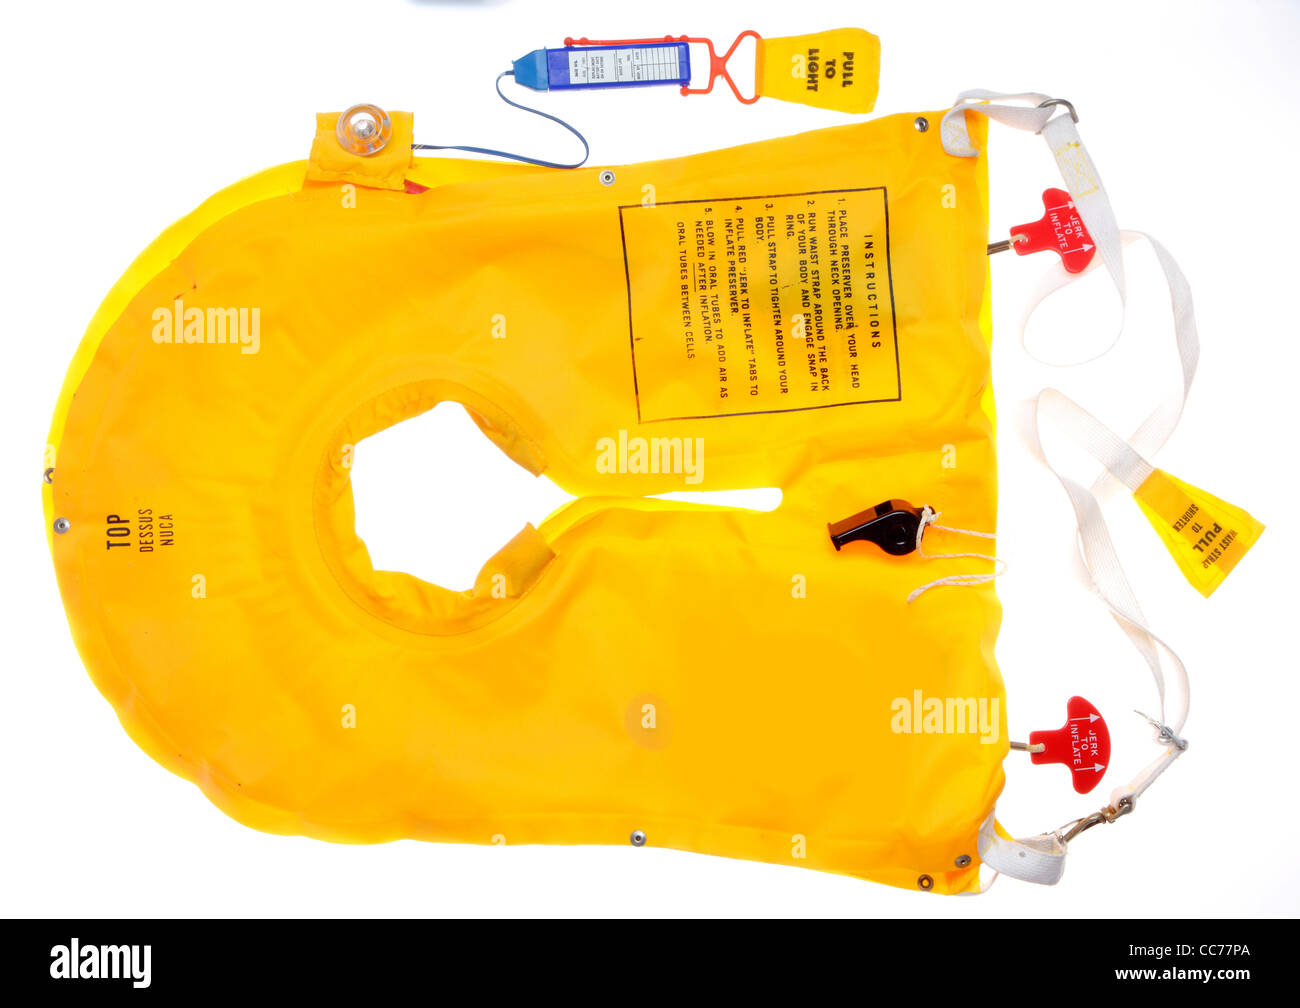 Yellow life vest, for use in airplanes, as emergency equipment. Inflatable. Stock Photo